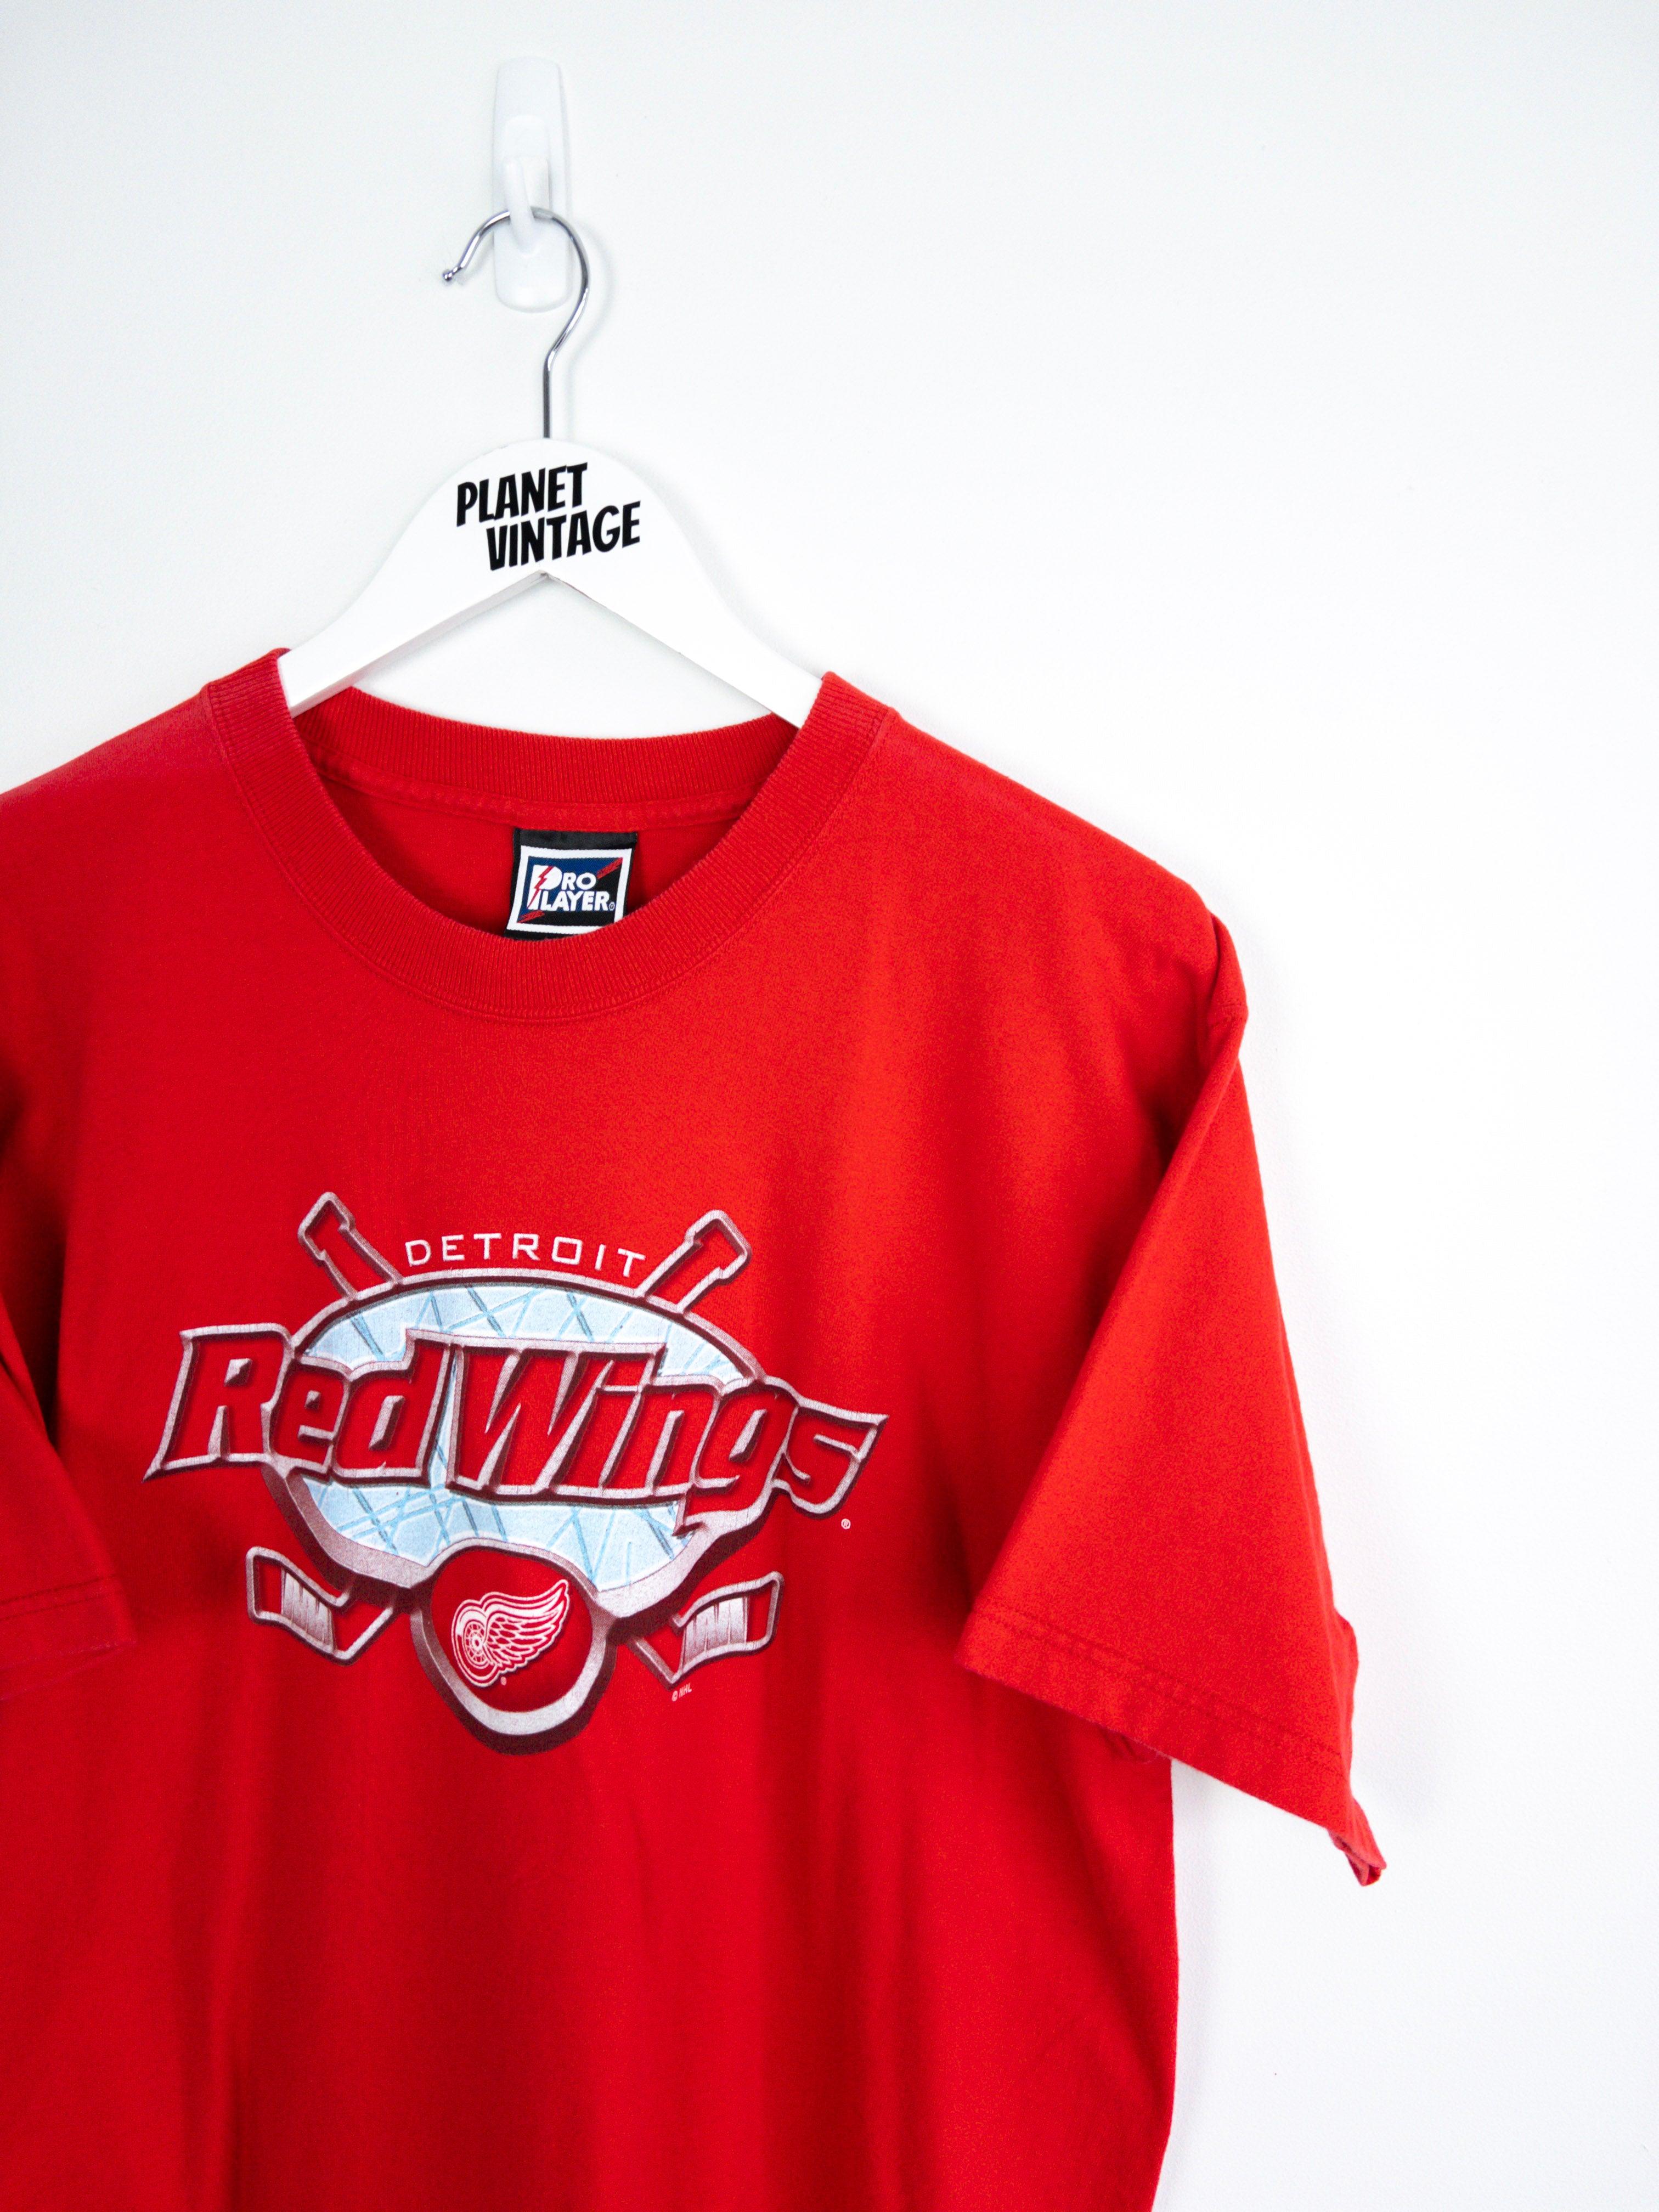 Detroit Red Wings Tee (XL) - Planet Vintage Store